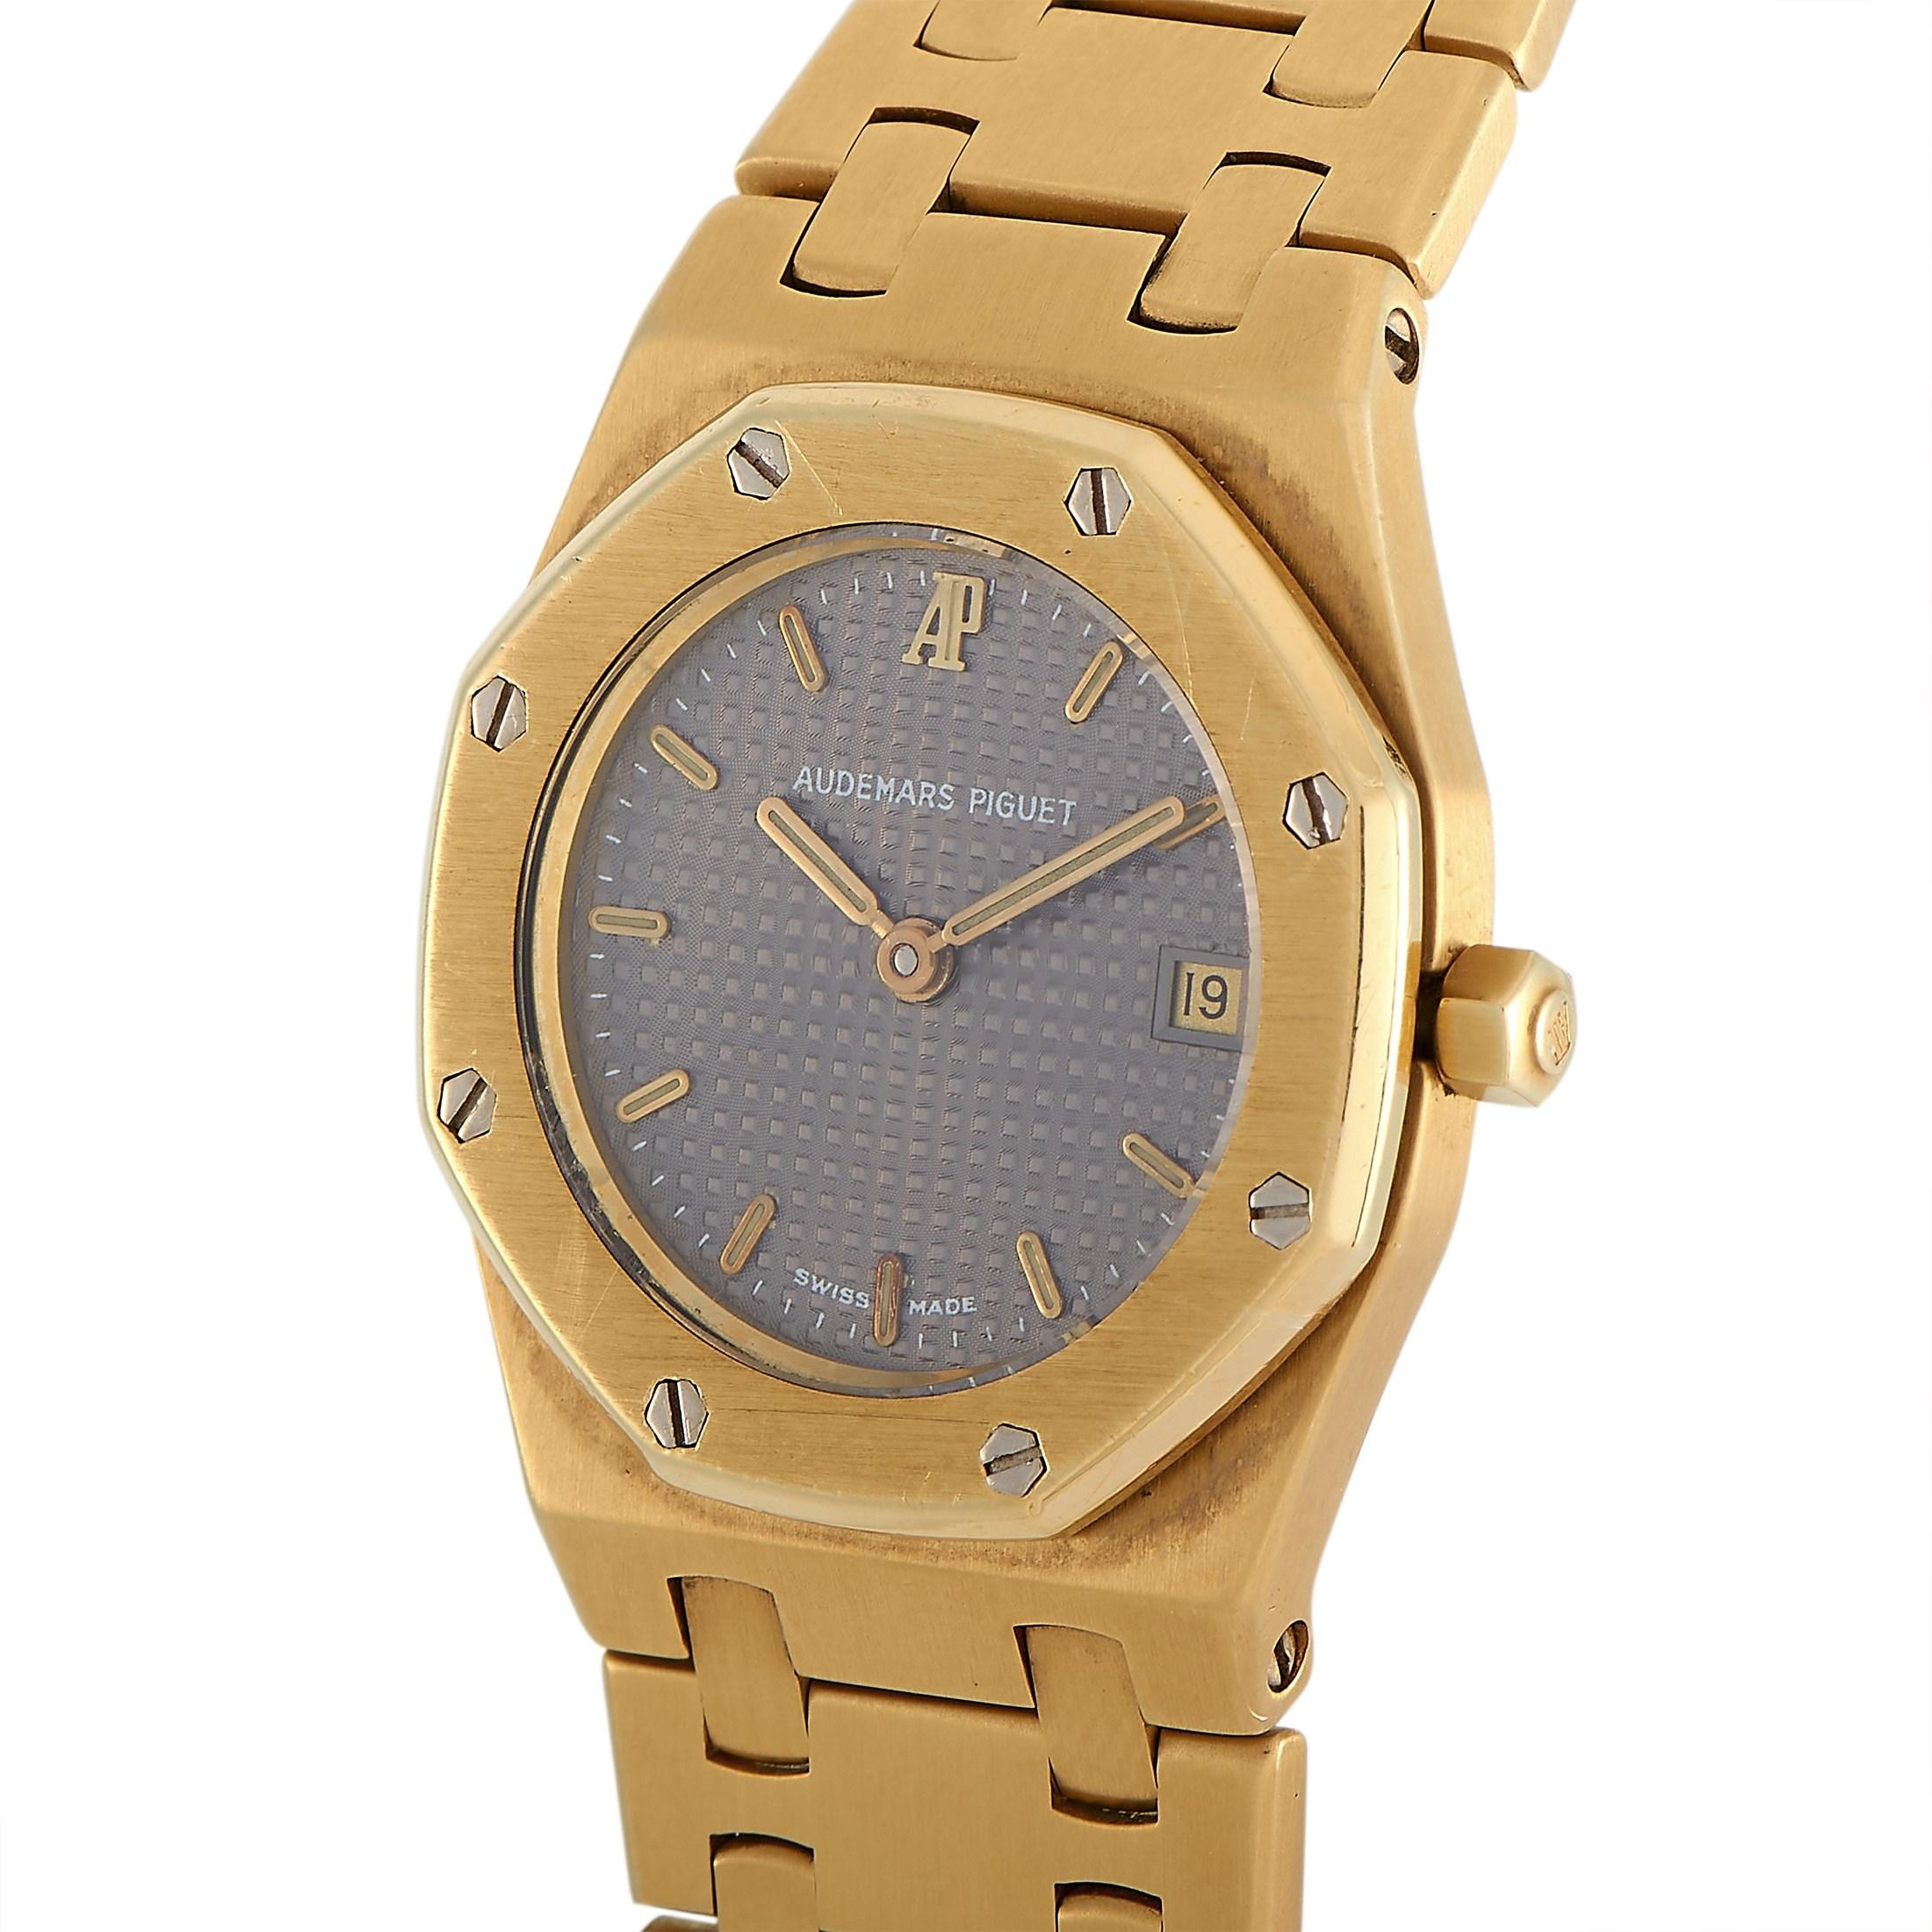 The Audemars Piguet Royal Oak Ladies Watch is an opulent addition to any woman’s fine jewelry collection.

This stylish, understated luxury design features a 30mm case, octagonal bezel, and bracelet crafted from shimmering 18K Yellow Gold. The